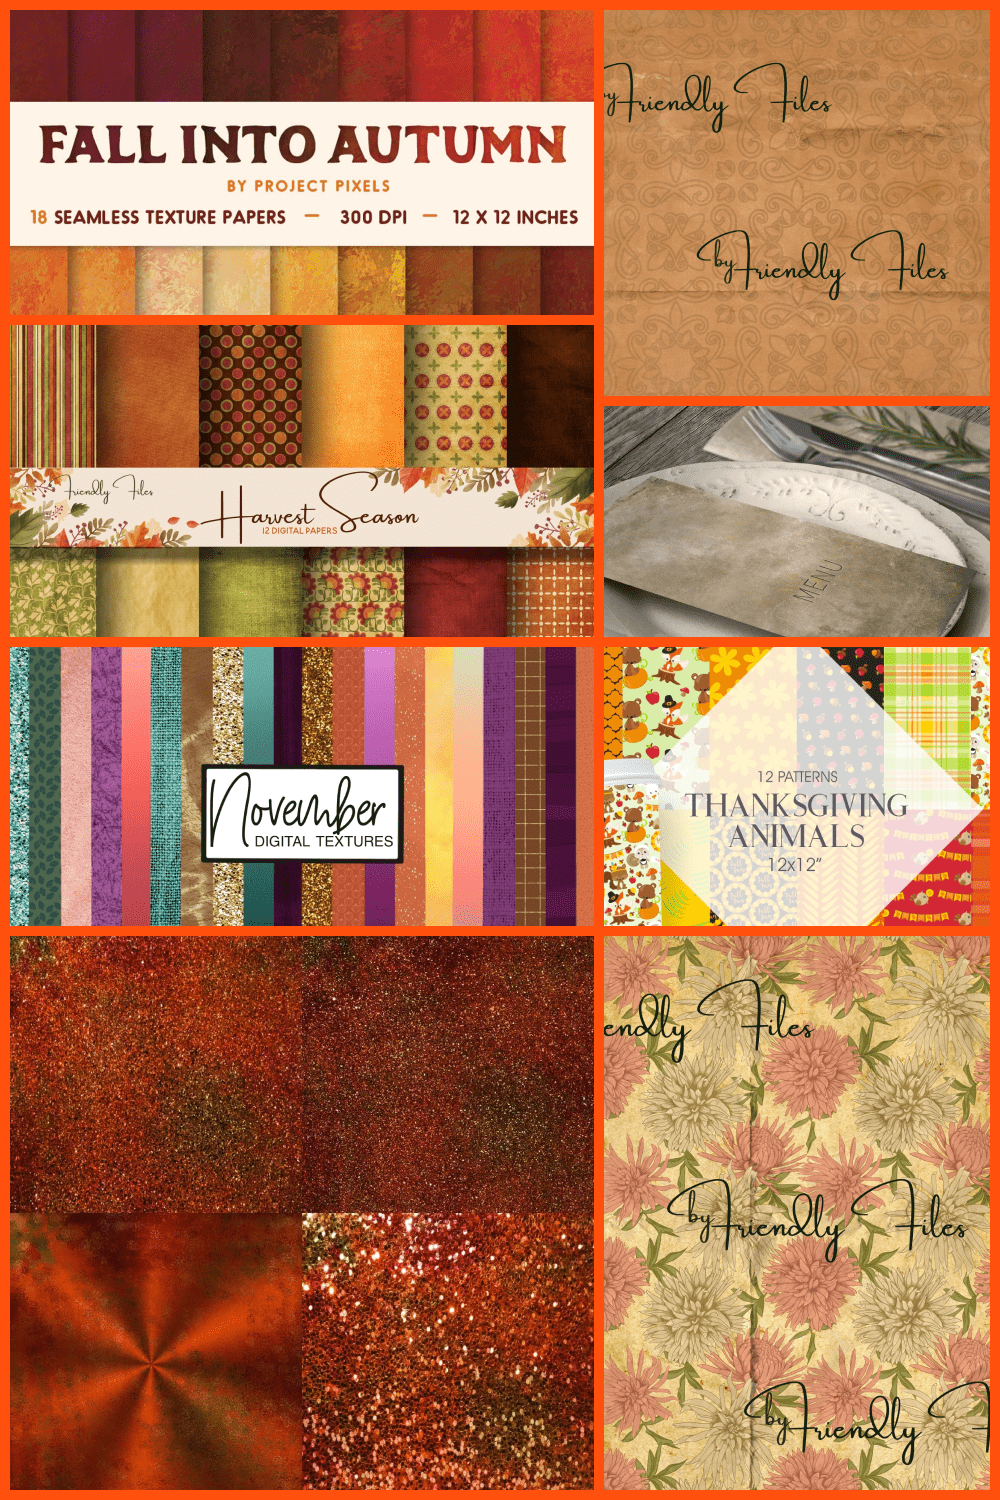 Thanksgiving Textures And Patterns - Pinterest.